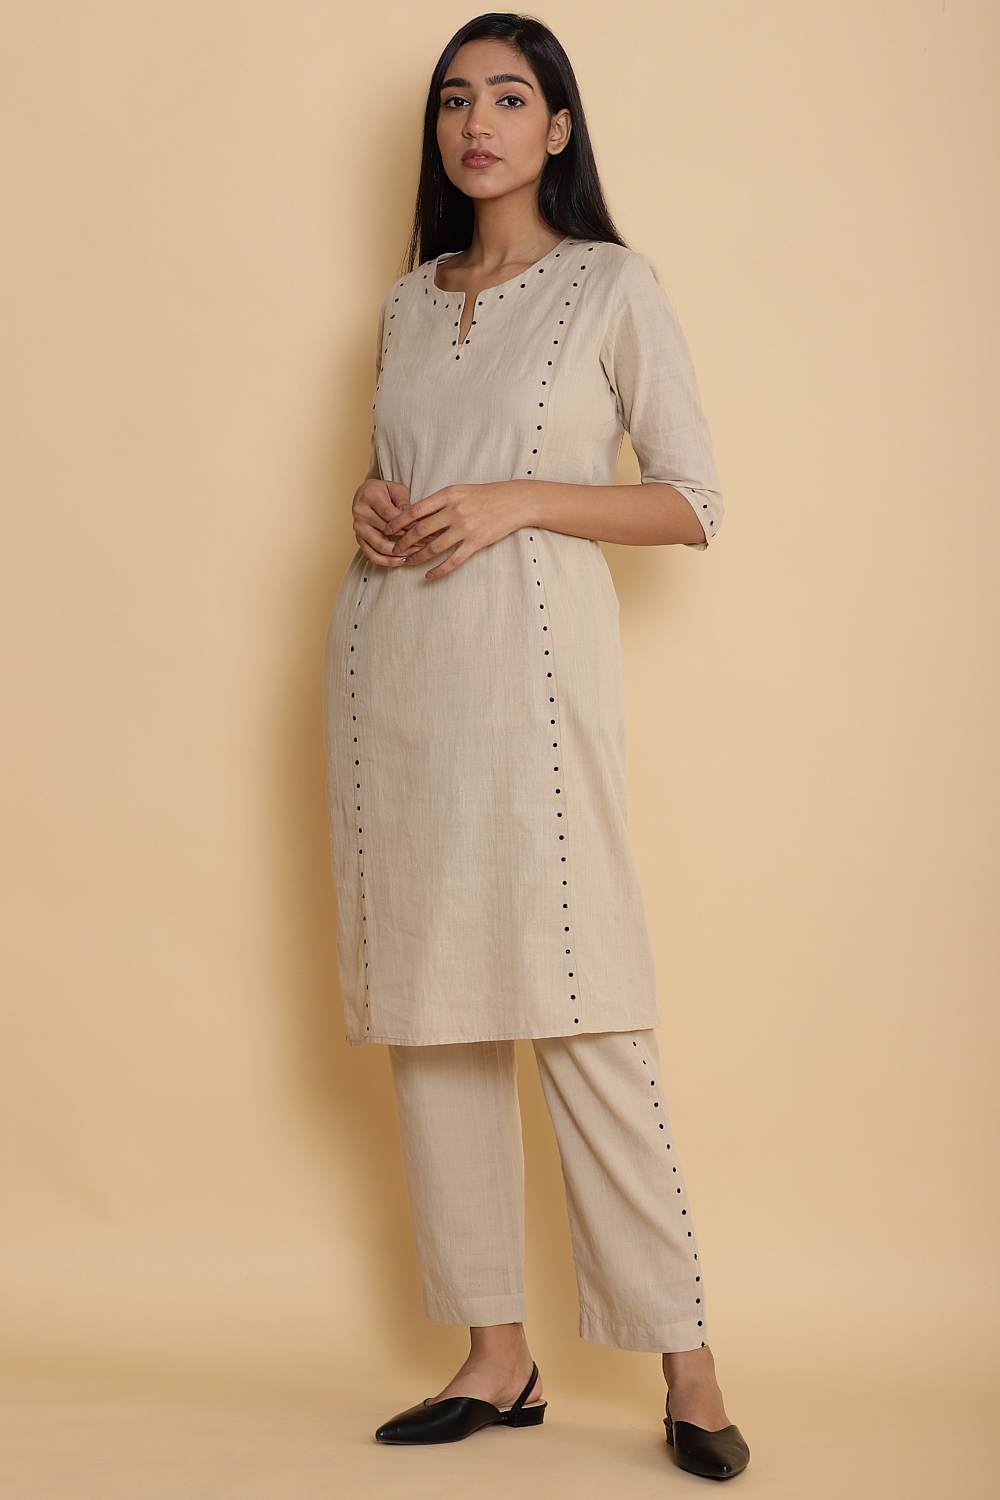 ABRAHAM AND THAKORE | Handwoven Side Dot Embroidered Dress